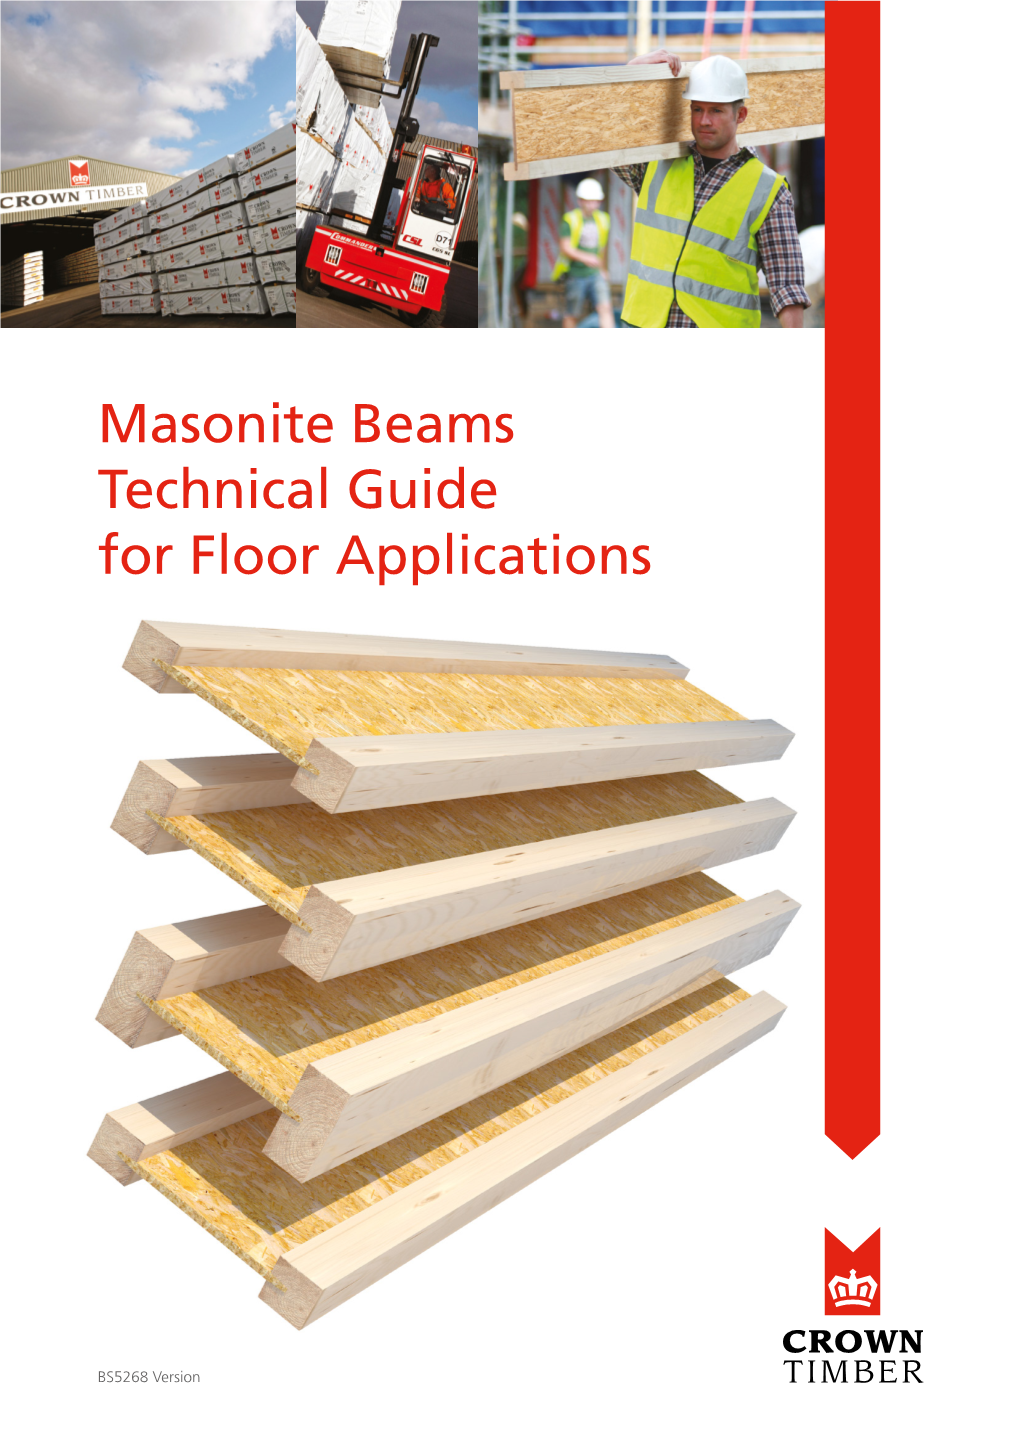 Masonite Beams Technical Guide for Floor Applications